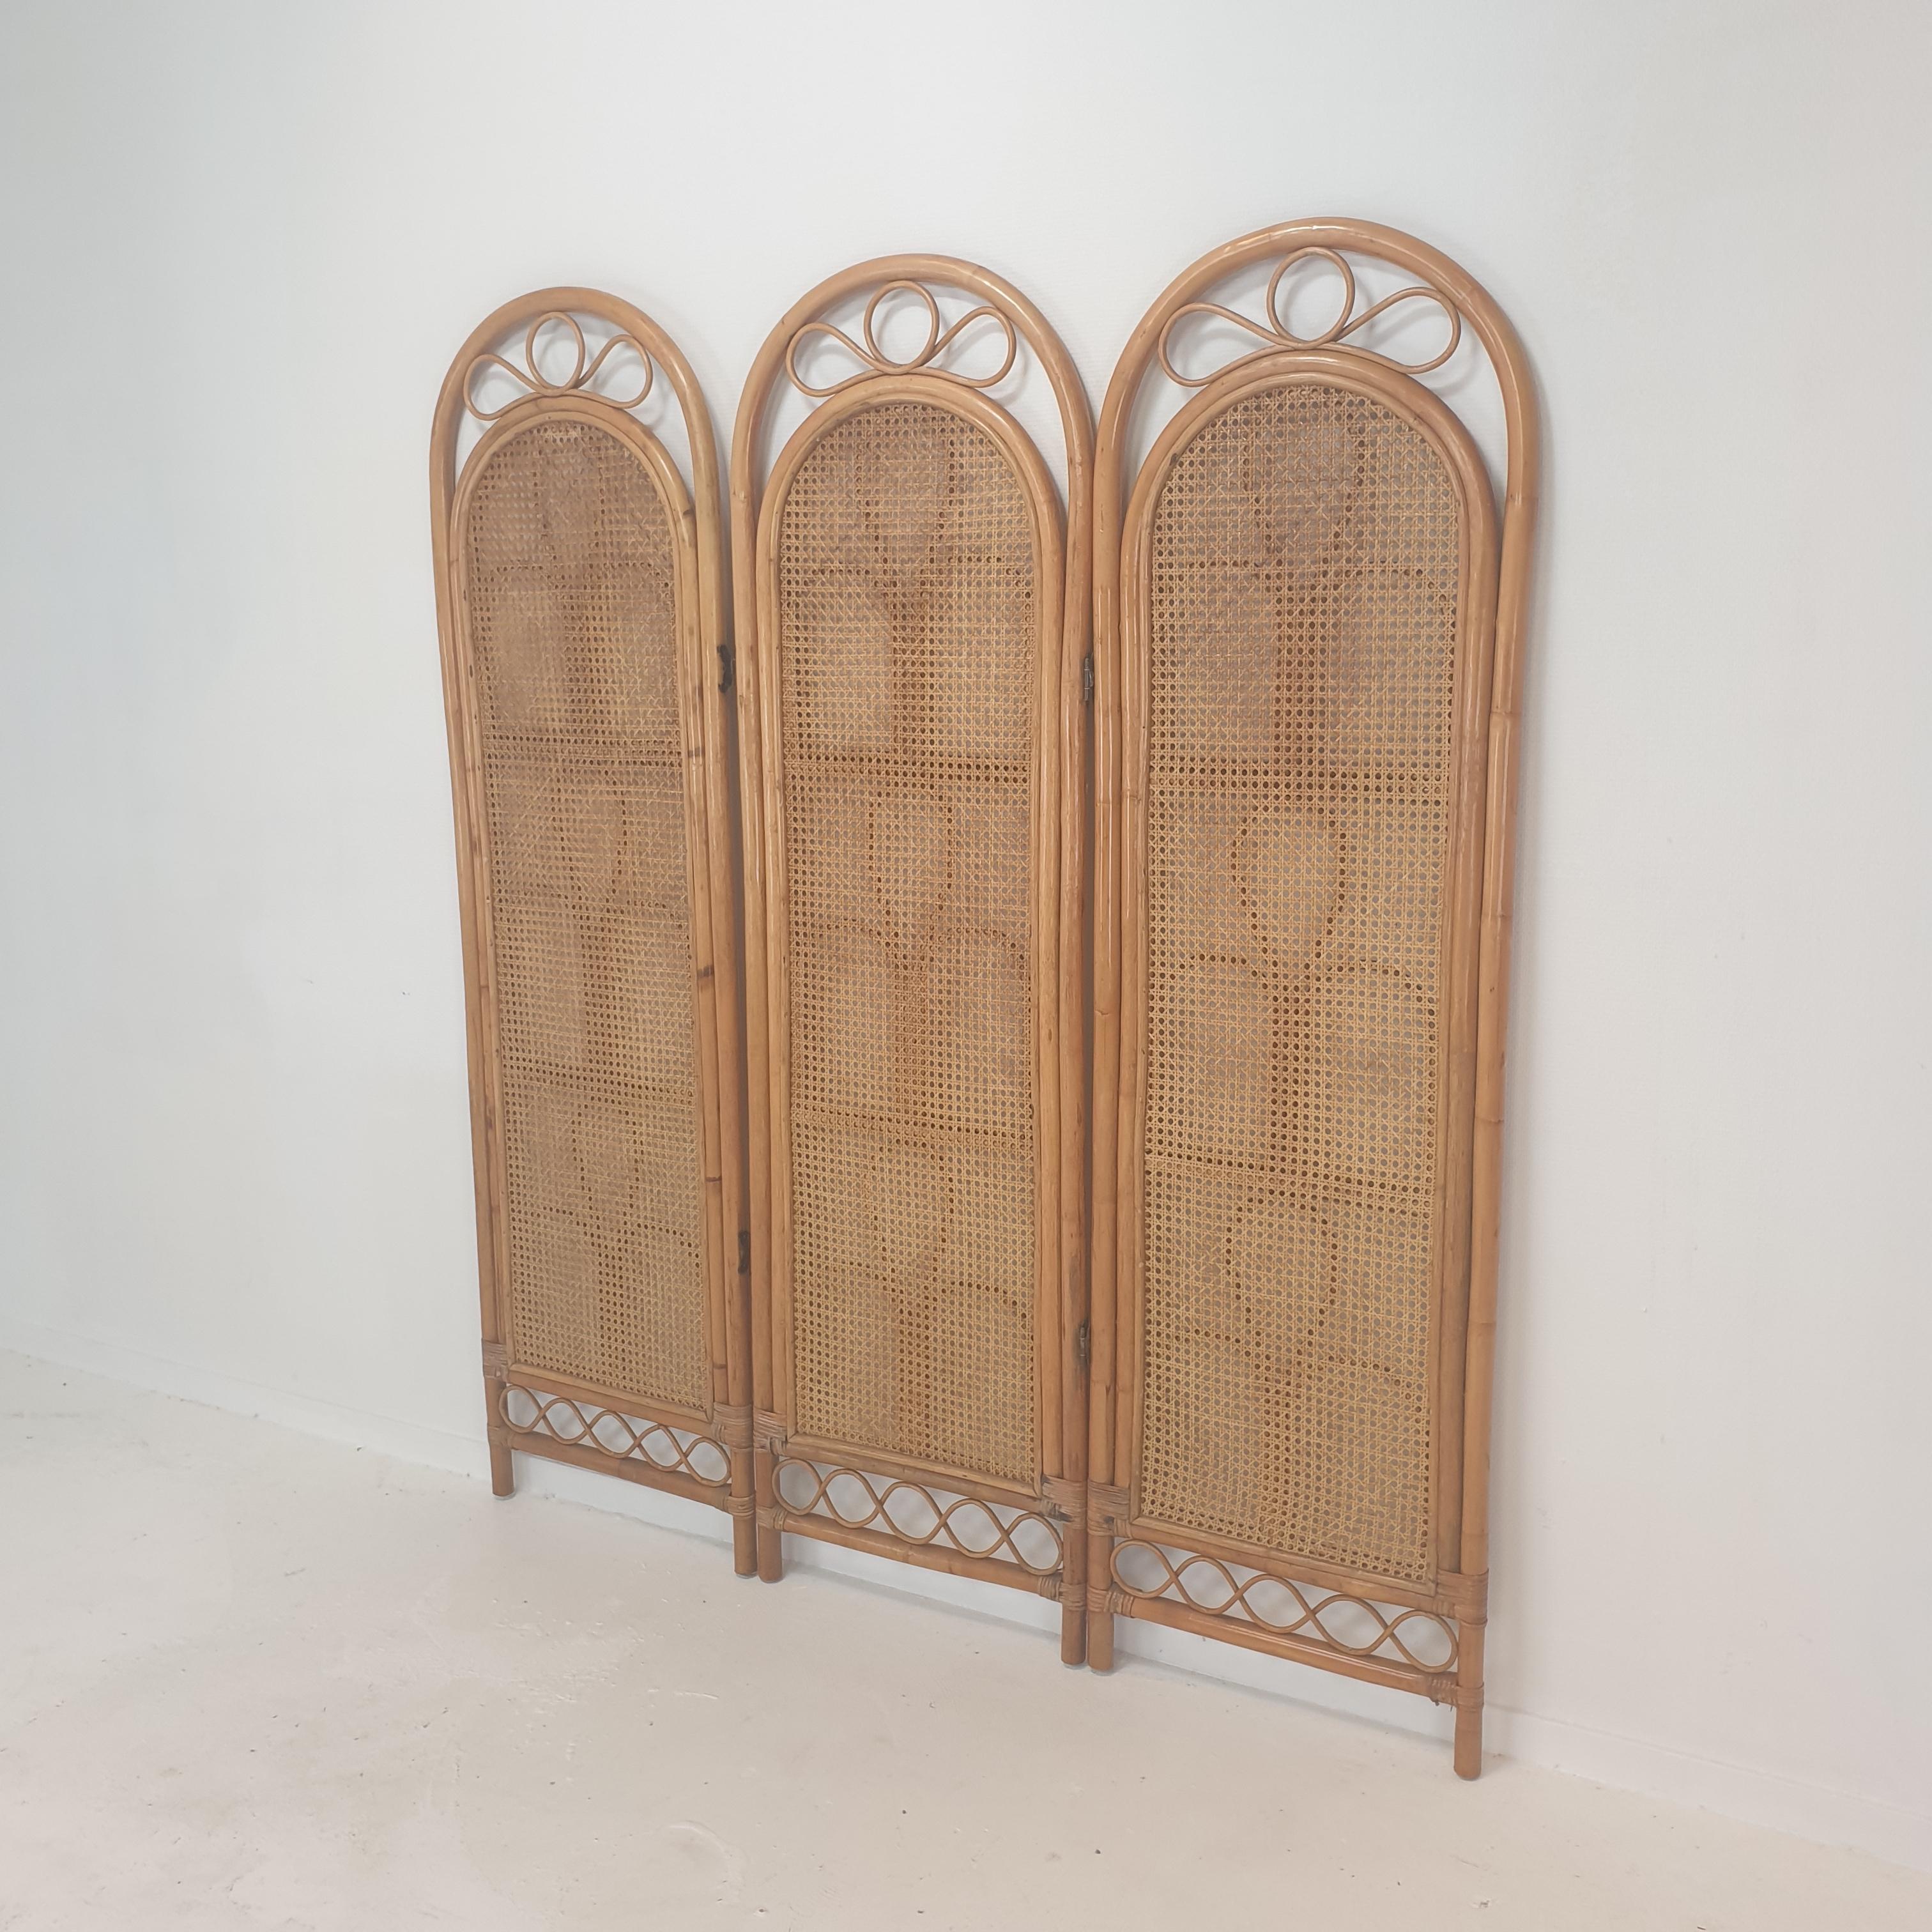 Italian Room Divider in Rattan and Wicker, 1960s For Sale 6